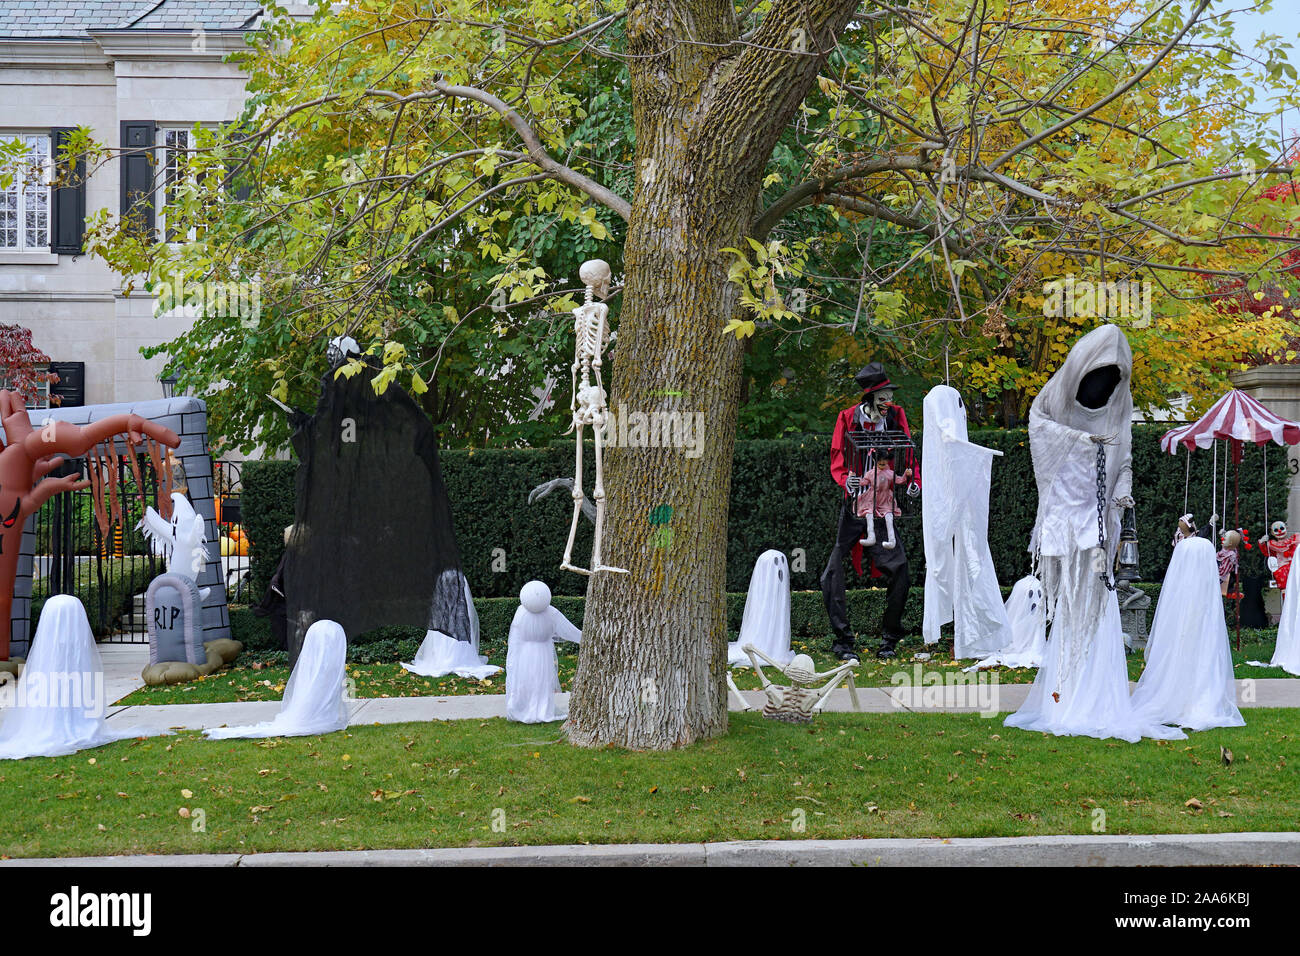 PITTSBURGH - NOVEMBER 2019:  Halloween is a popular holiday for which people put out quite imaginative and gory decorations in front of their homes. Stock Photo